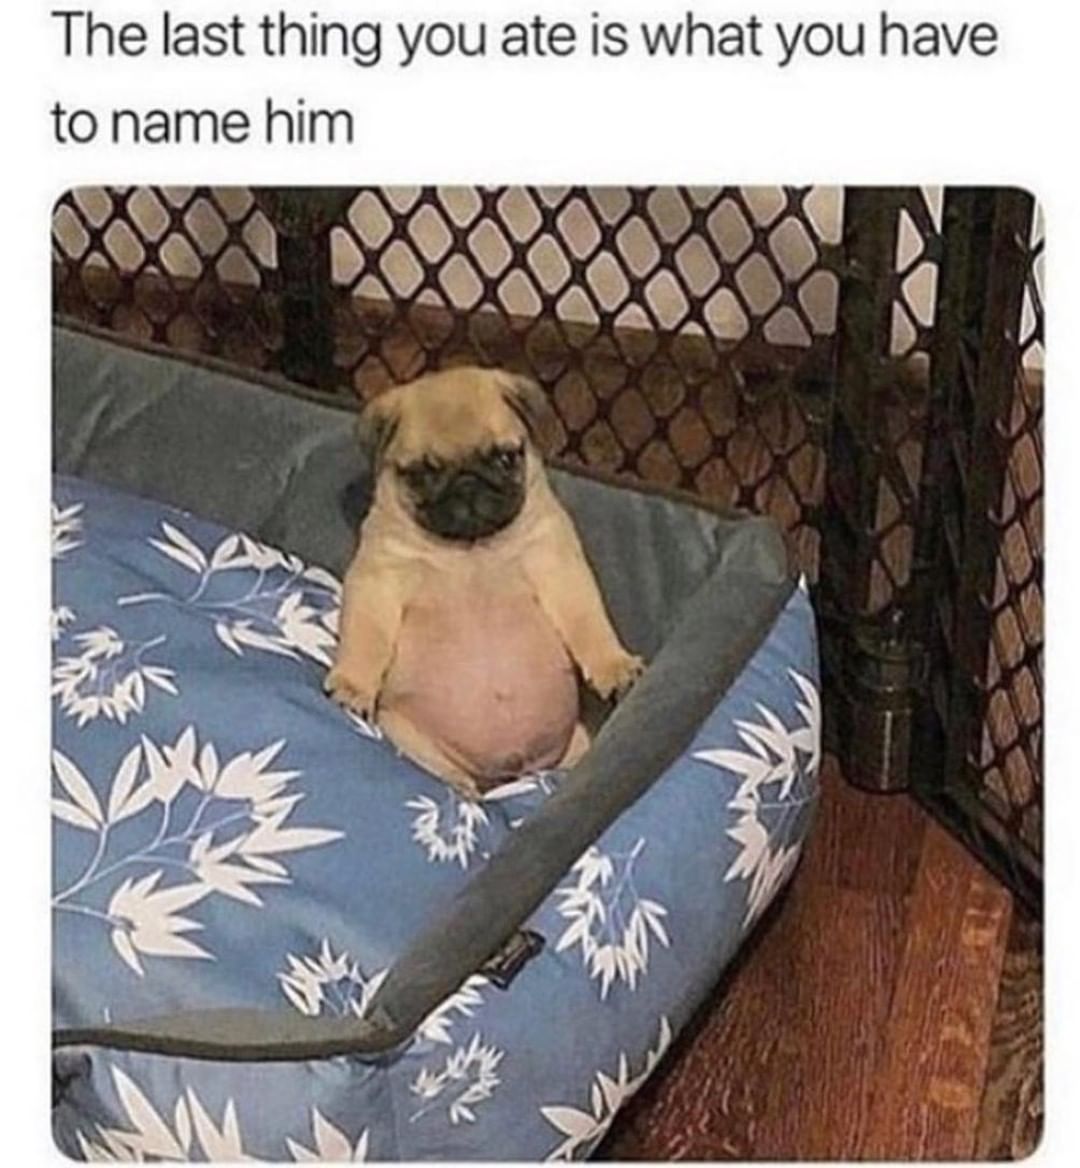 The last thing you ate is what you have to name him.